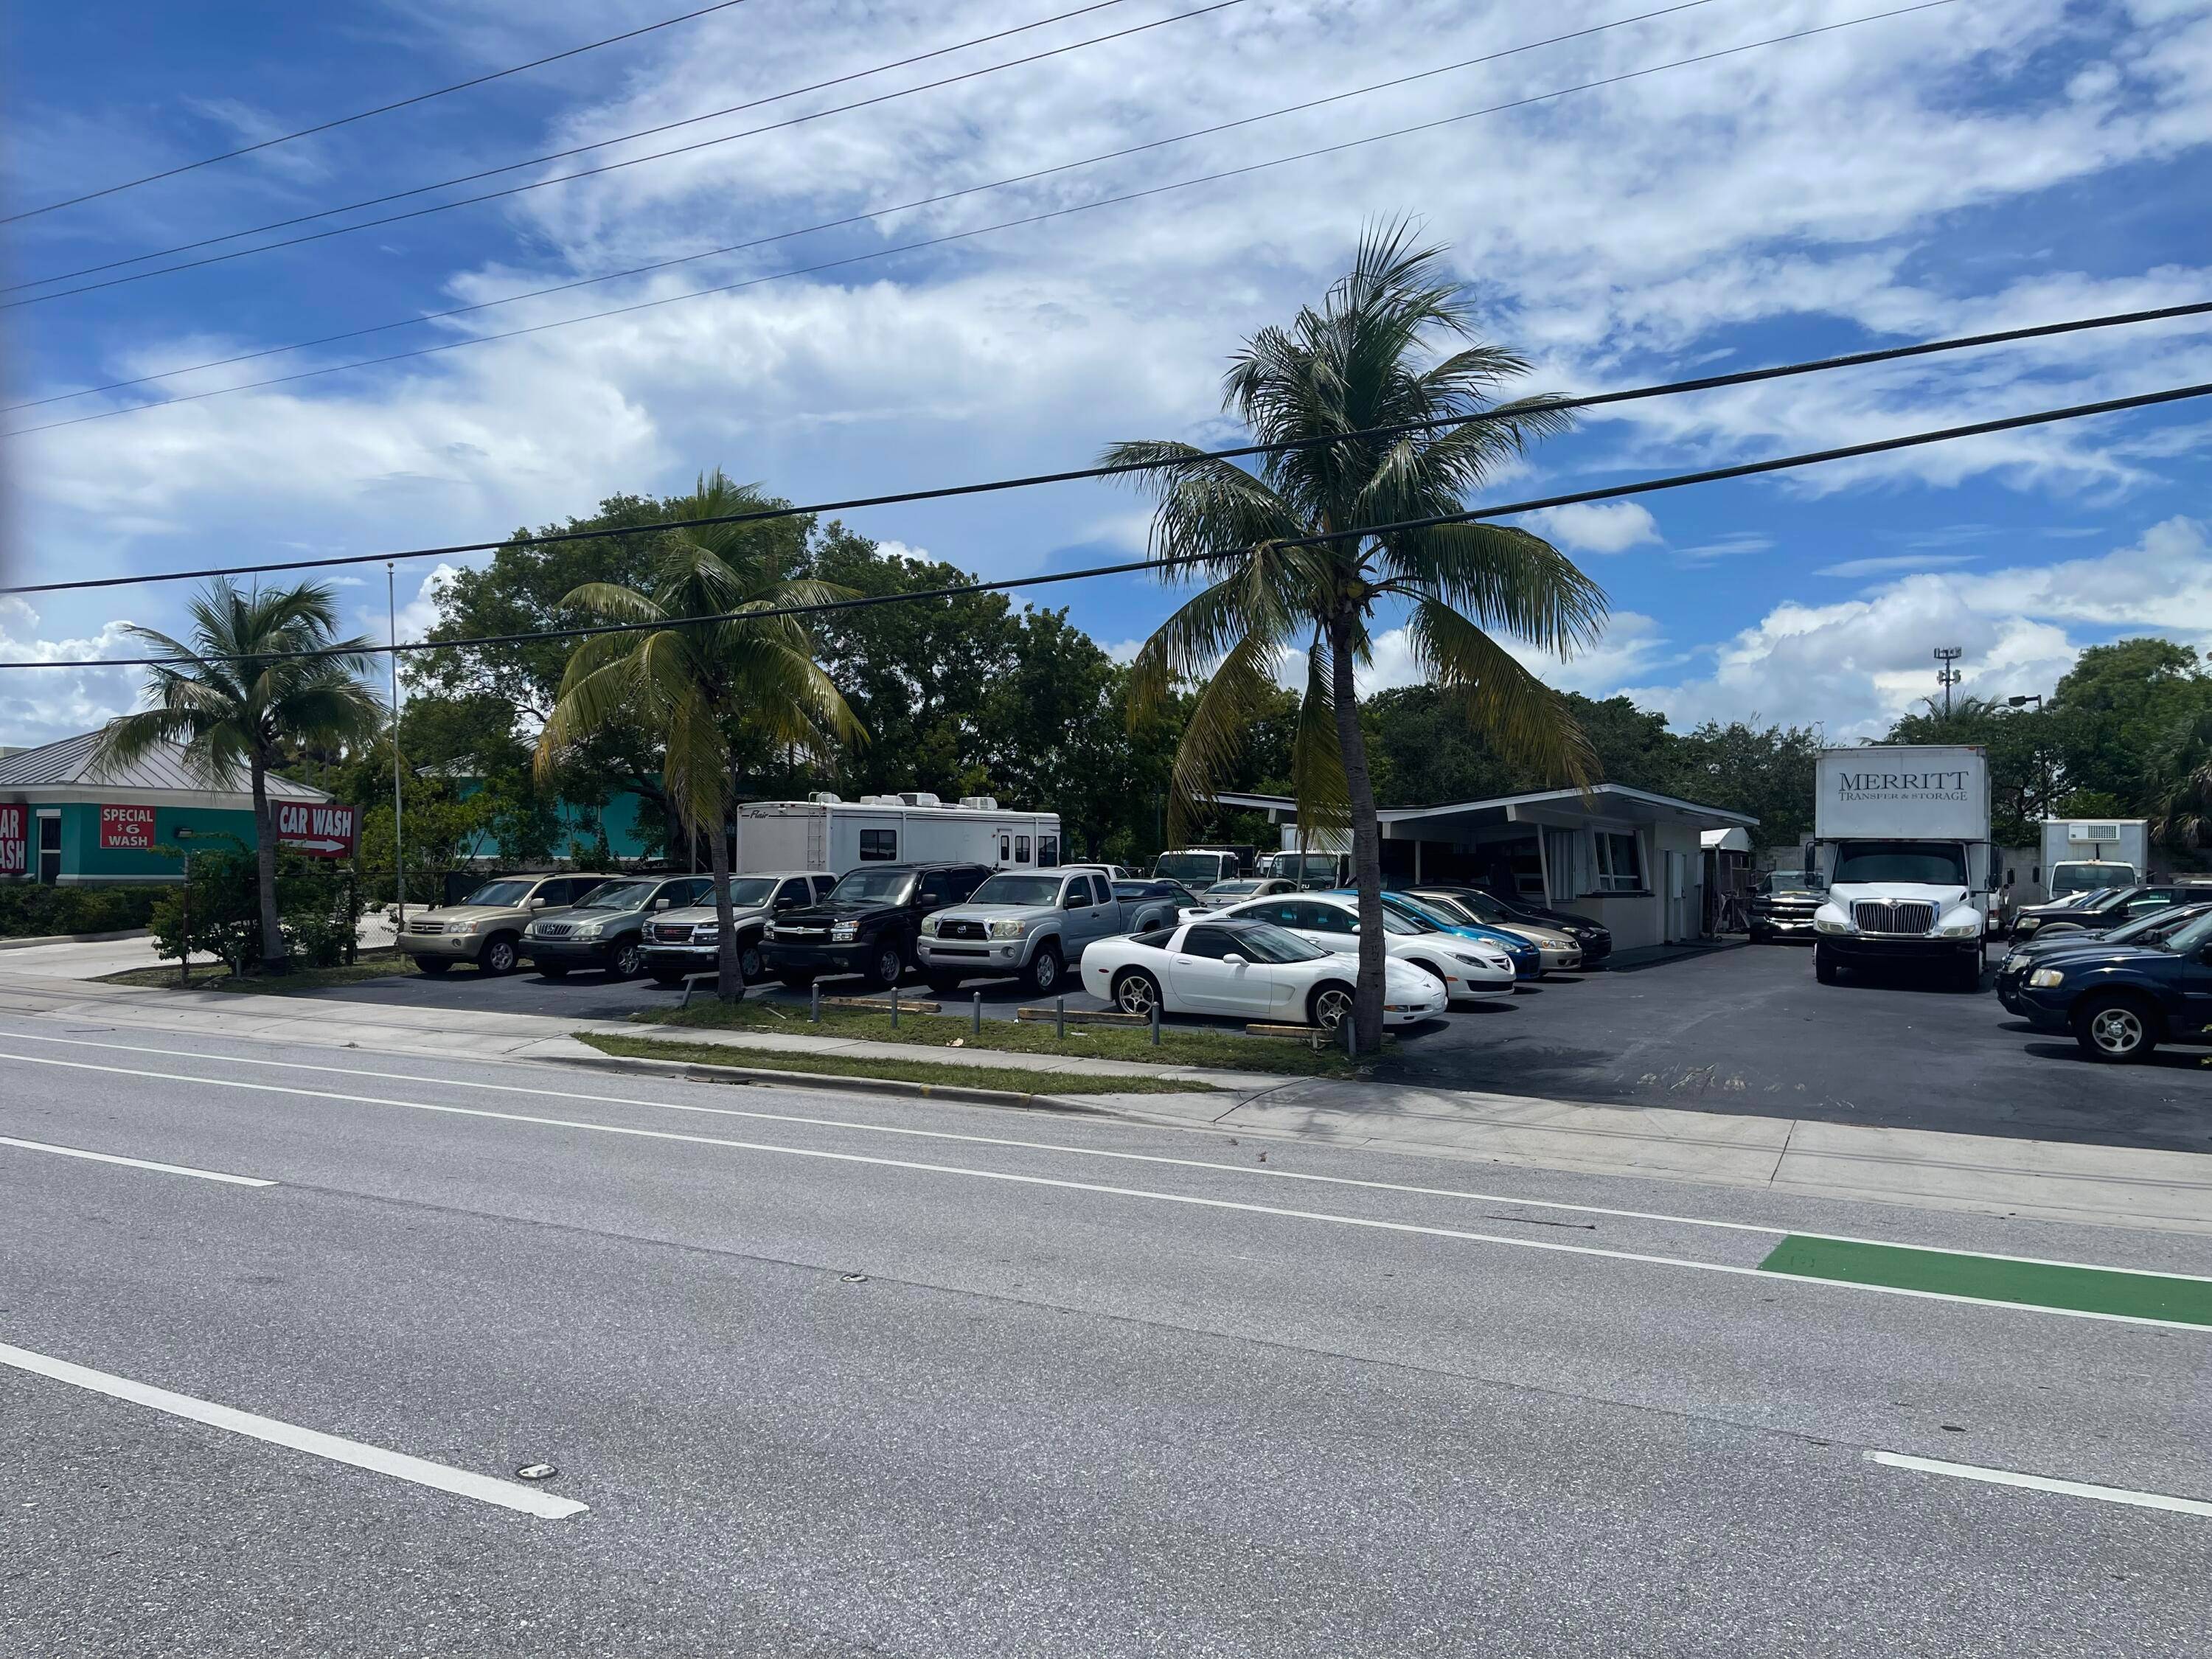 RARE OPPORTUNITY TO PURCHASE A USED CAR DEALERSHIP IN DELRAY BEACH.